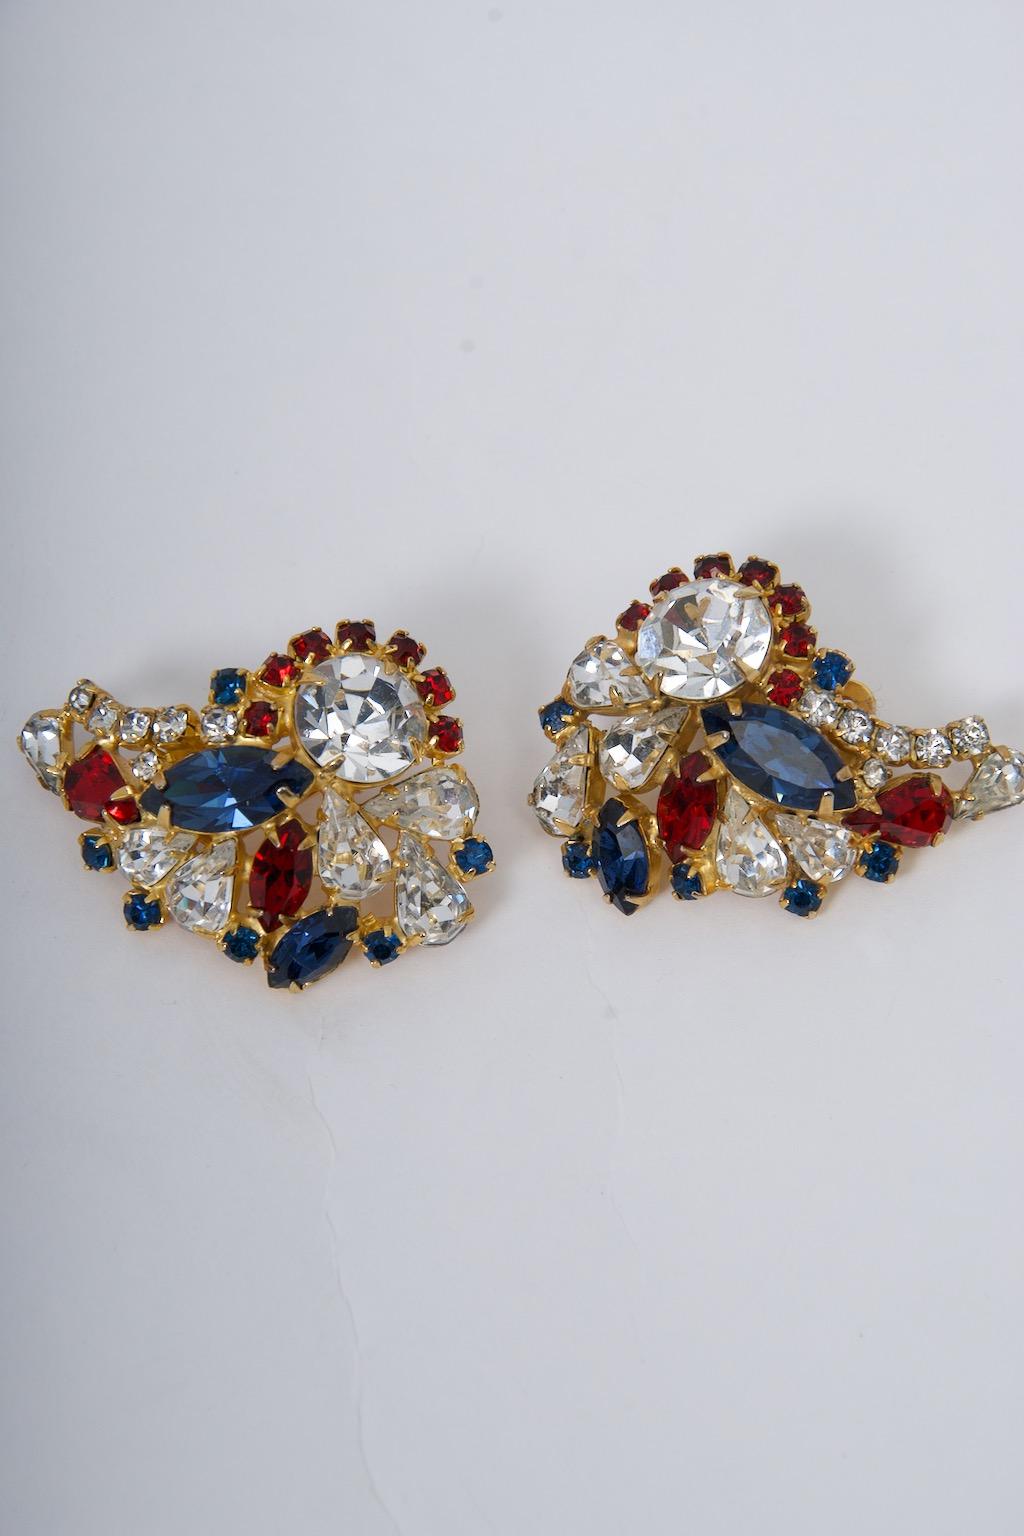 Hobé earrings featuring clear, sapphire, and ruby crystals in a goldtone metal paisley shaped frame. Signed 